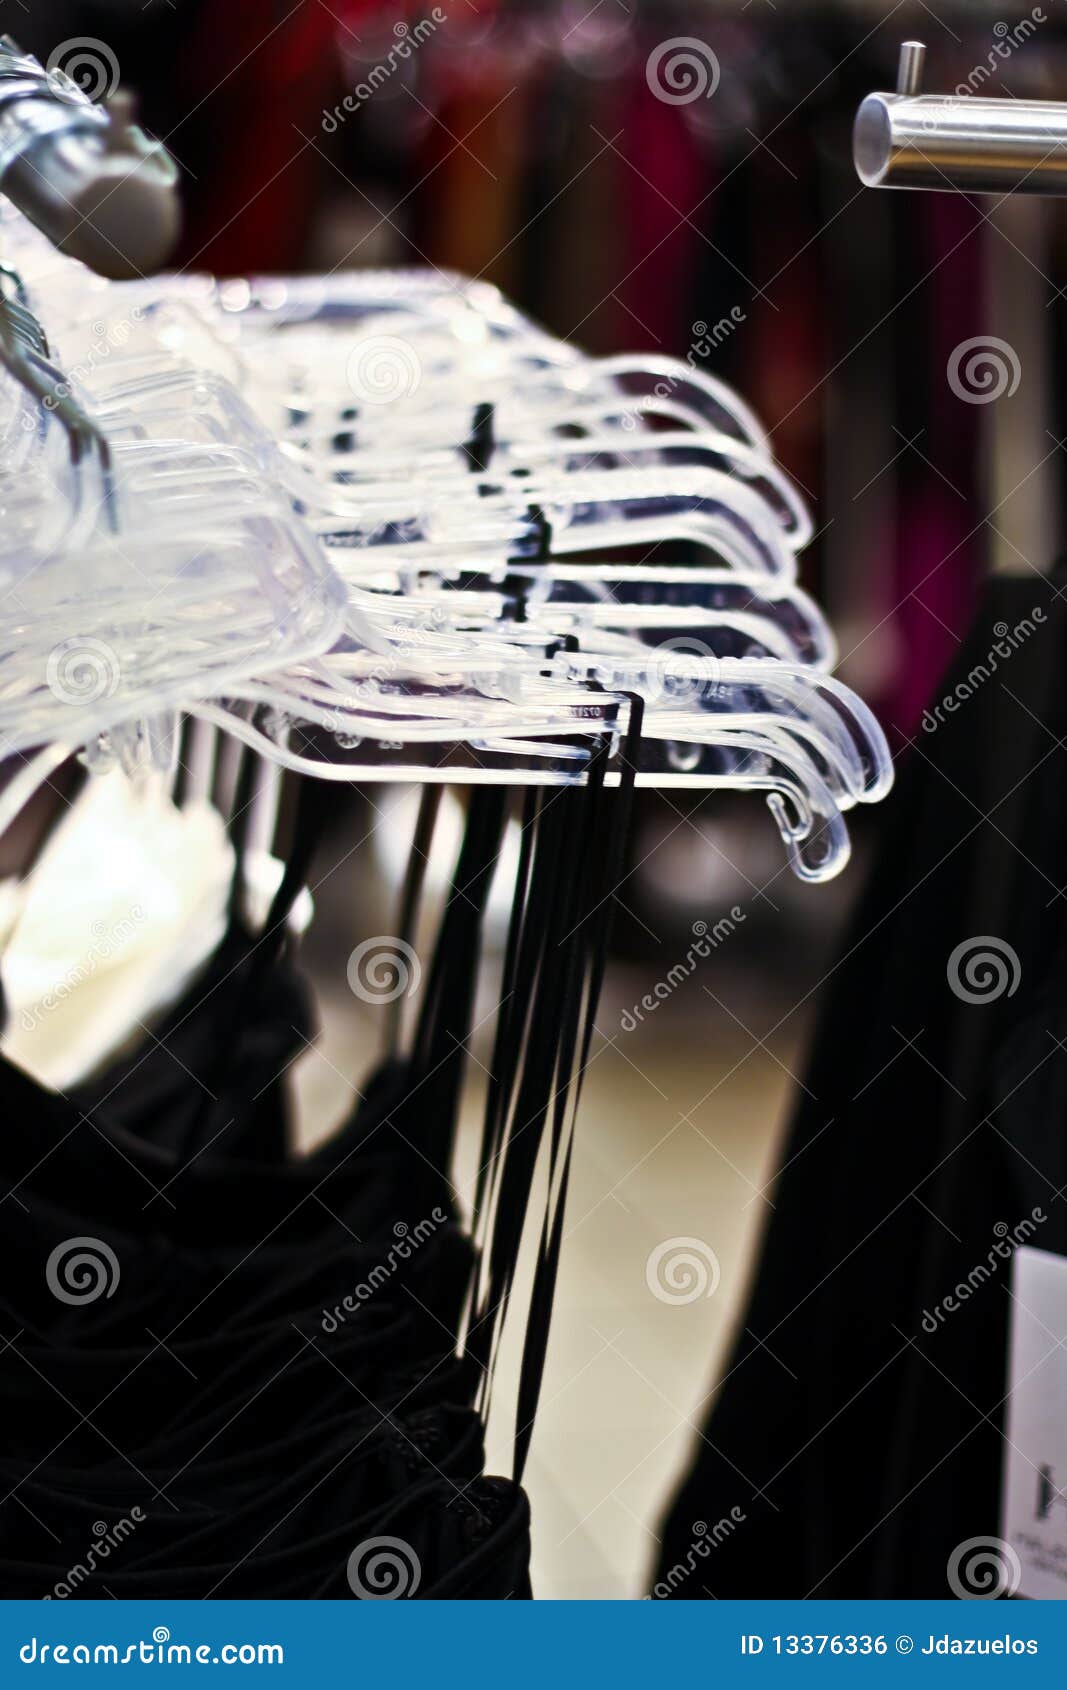 Racks of Dresses Hanging in a Store Stock Photo - Image of mall, dress ...